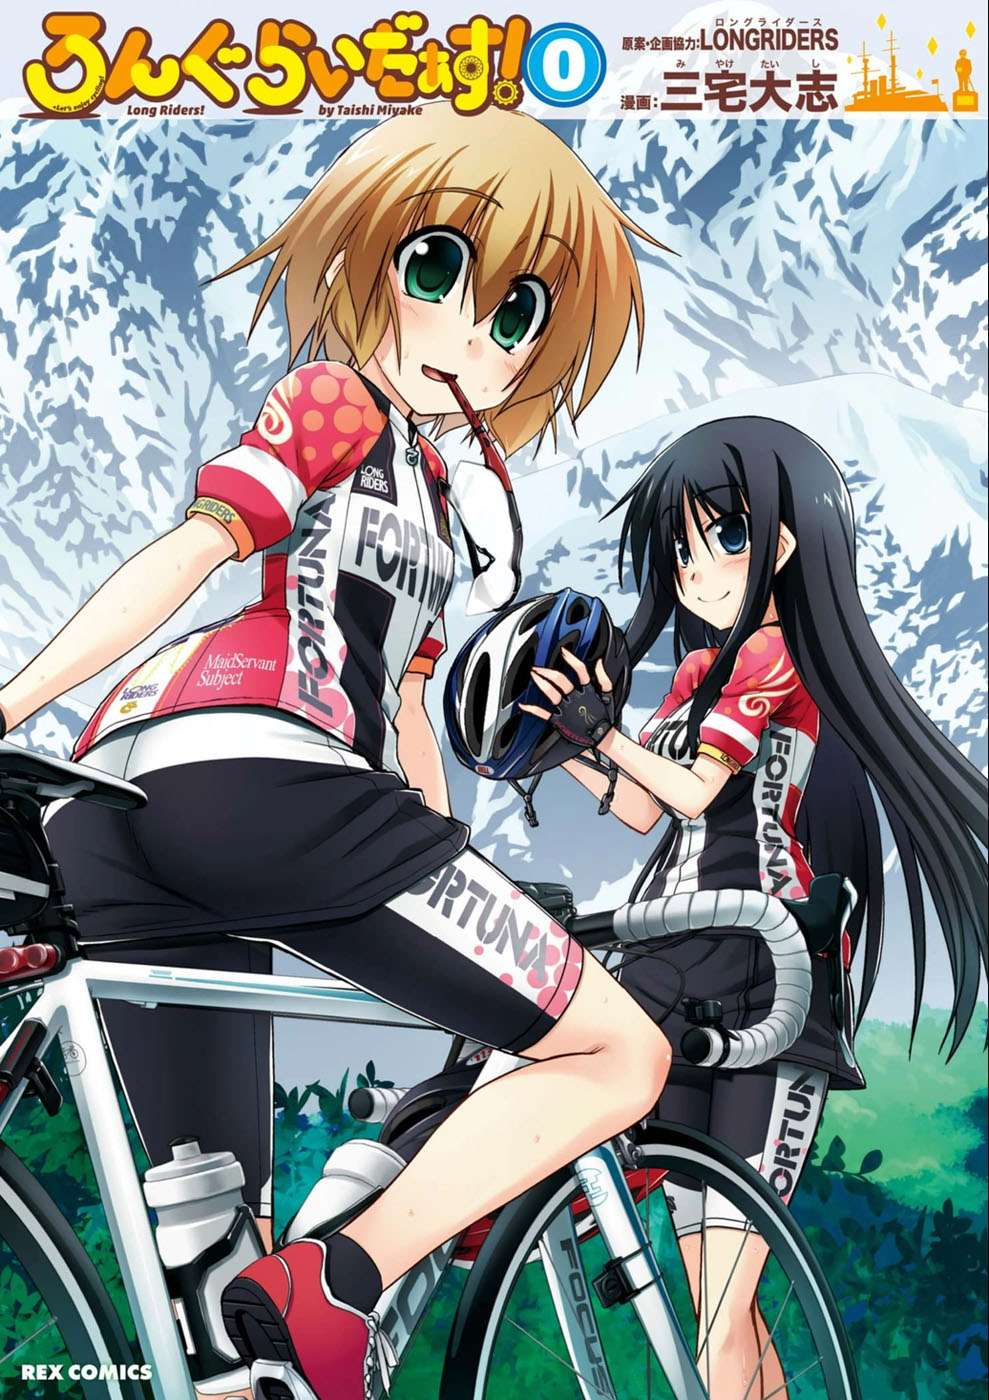 Long Riders! - chapter 22.1 - #1